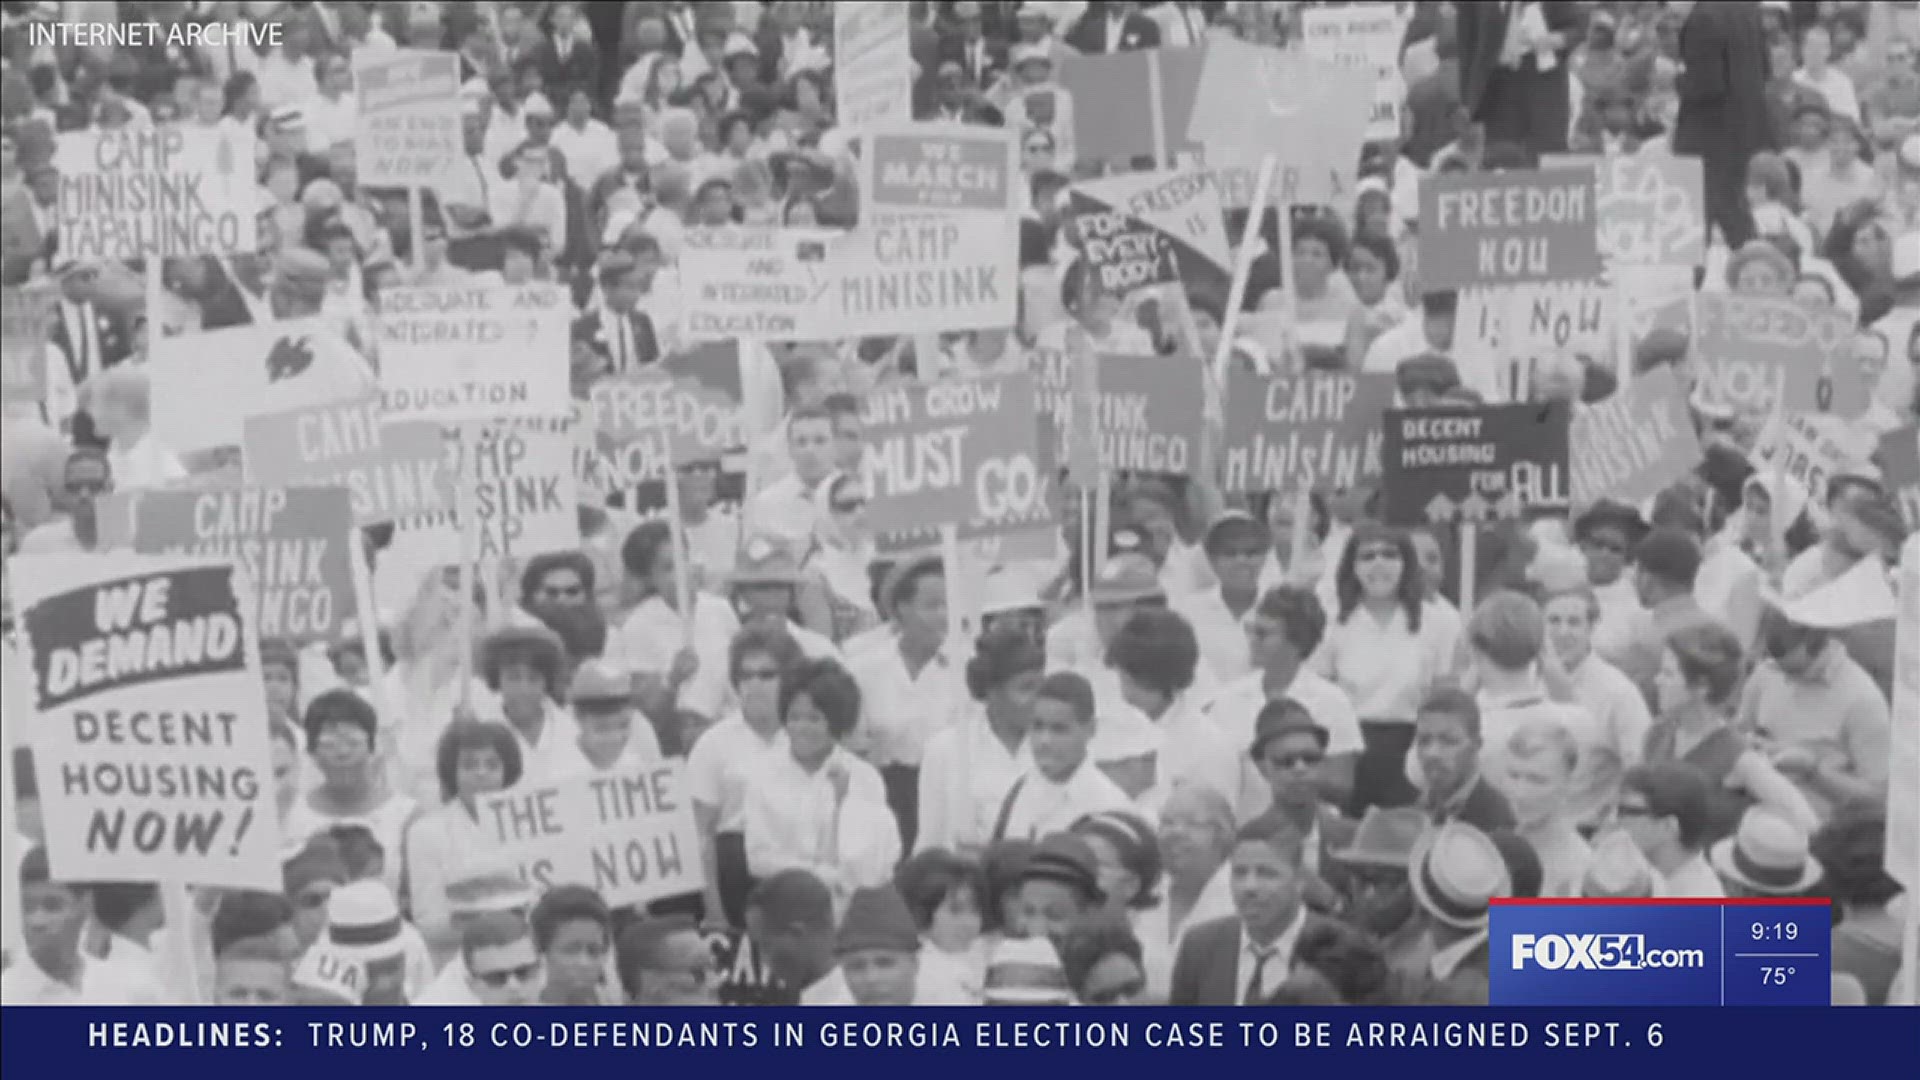 The " I have a Dream speech" that sparked the civil rights movement happened 60 years ago. Hear from those who experienced that monumental moment.